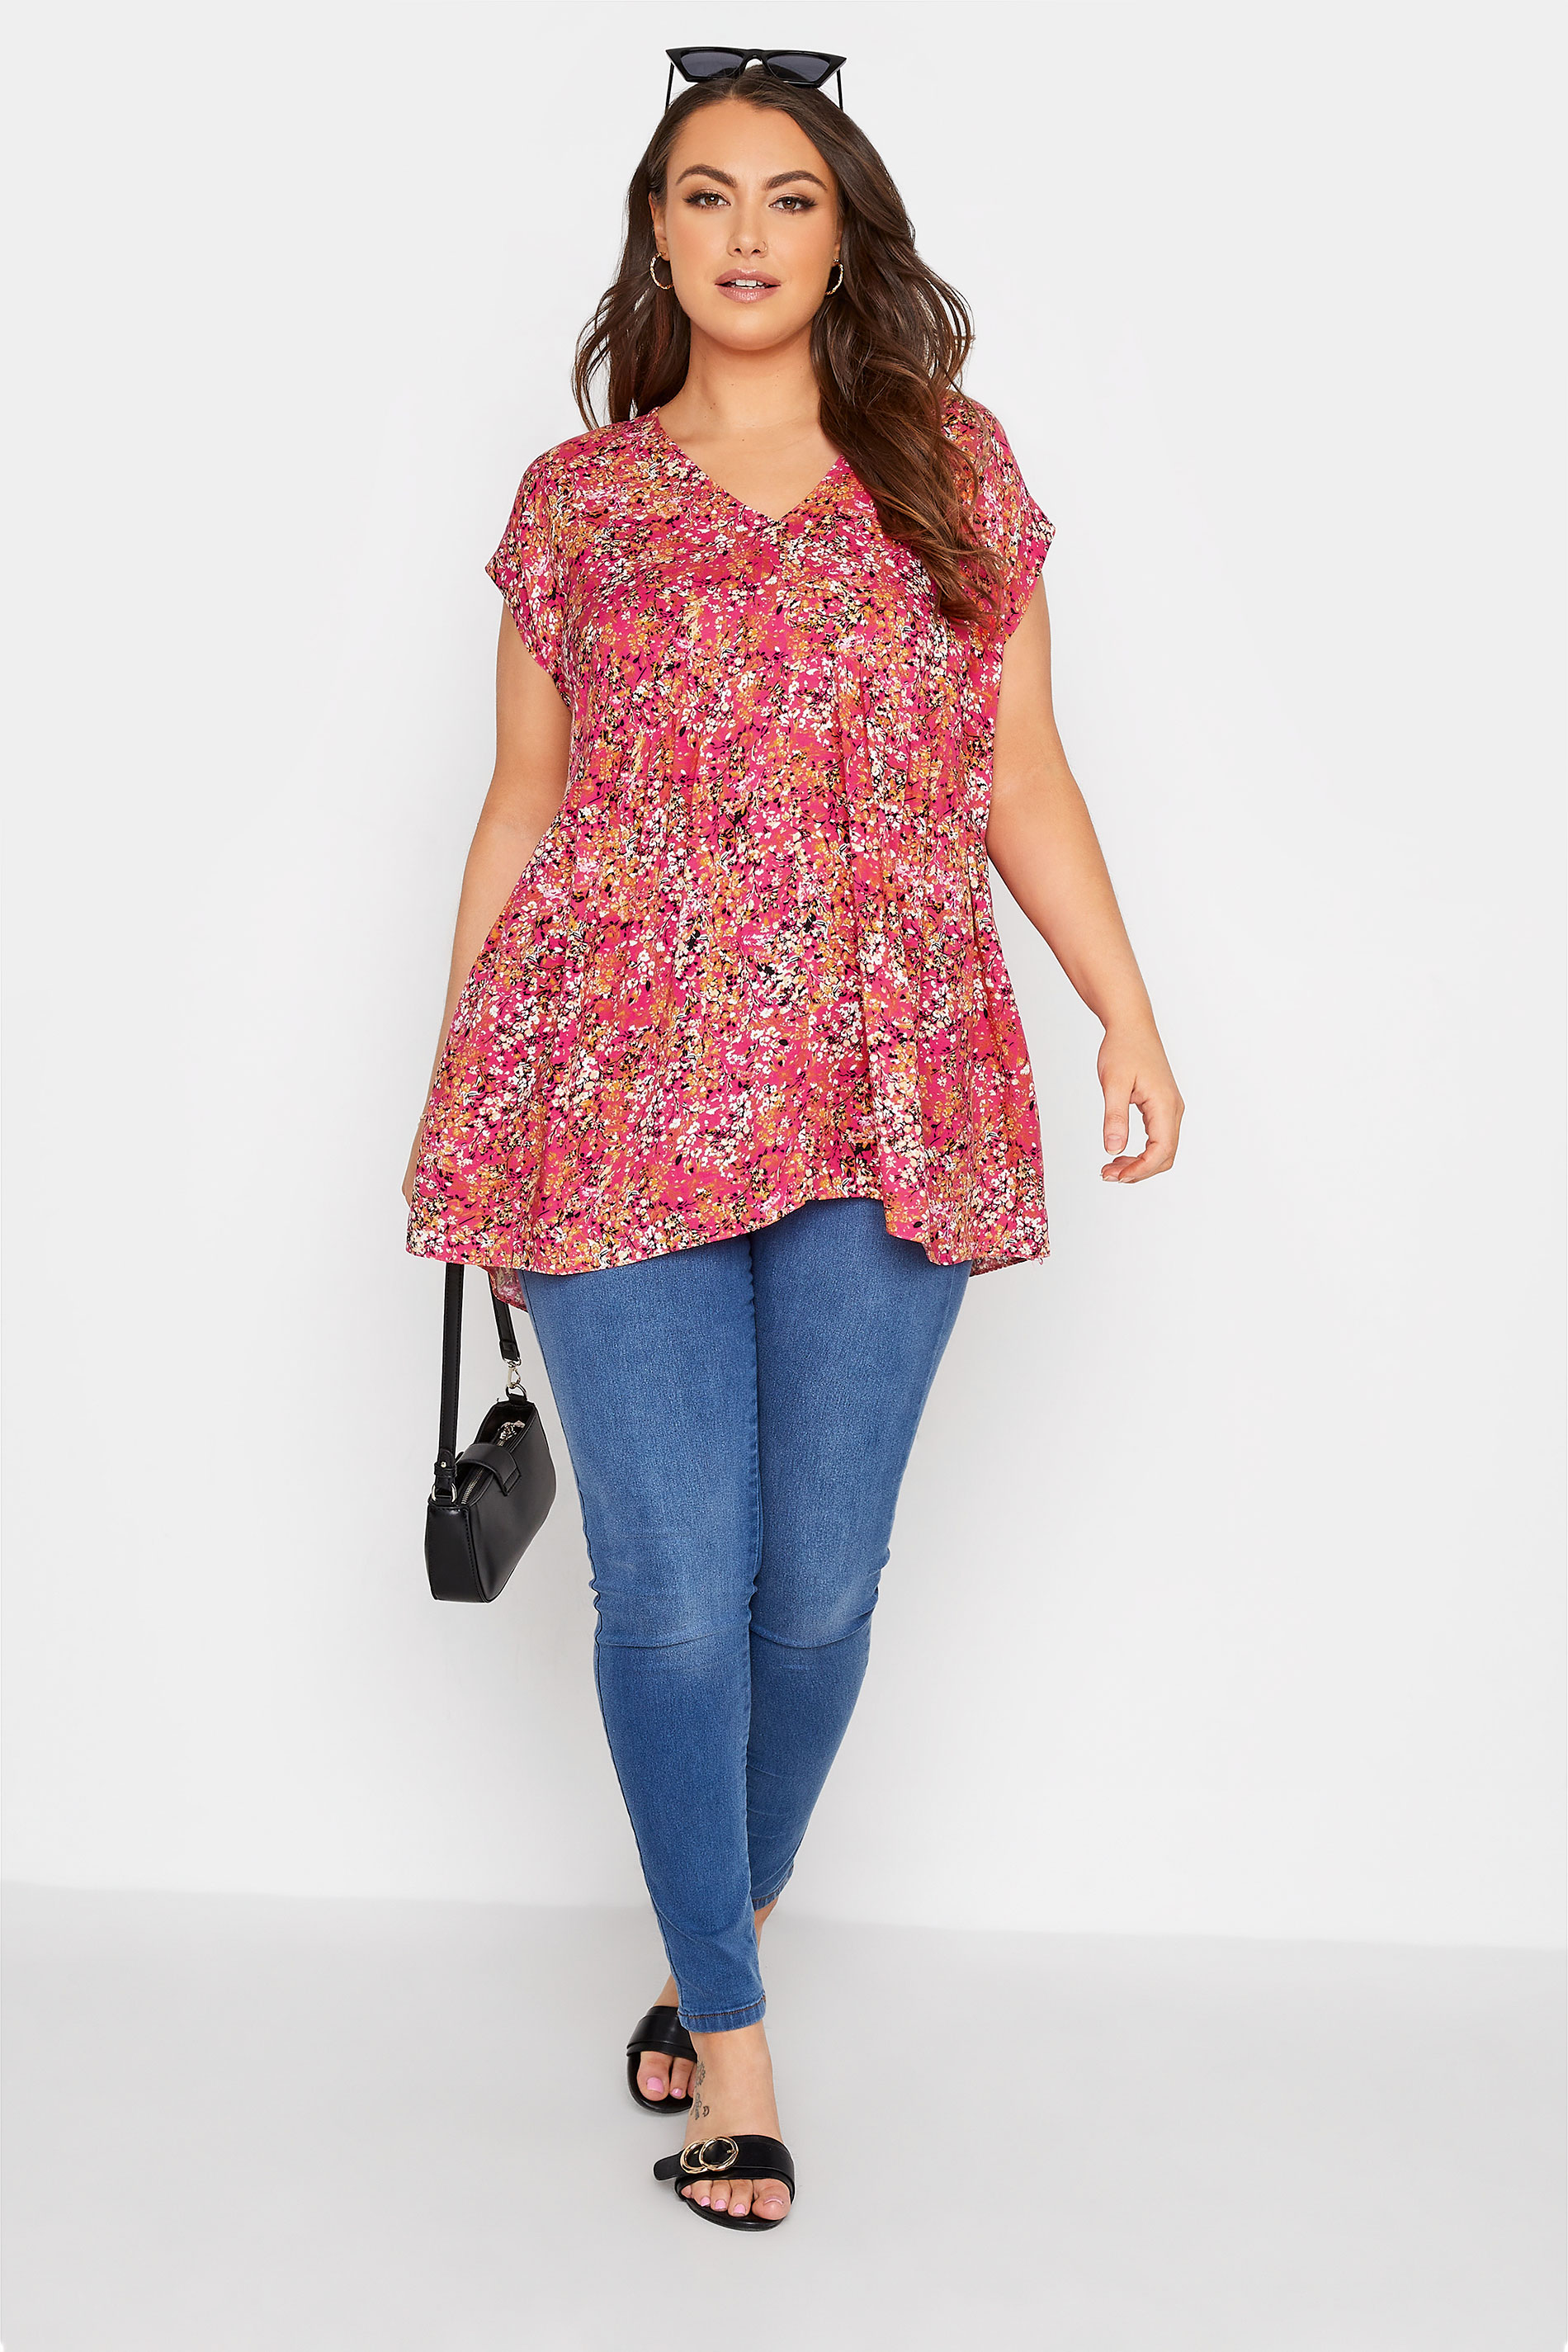 Grande taille  Tops Grande taille  Tops Ourlet Plongeant | YOURS LONDON - Tunique Rose Floral Ourlet Plongeant - NF48601